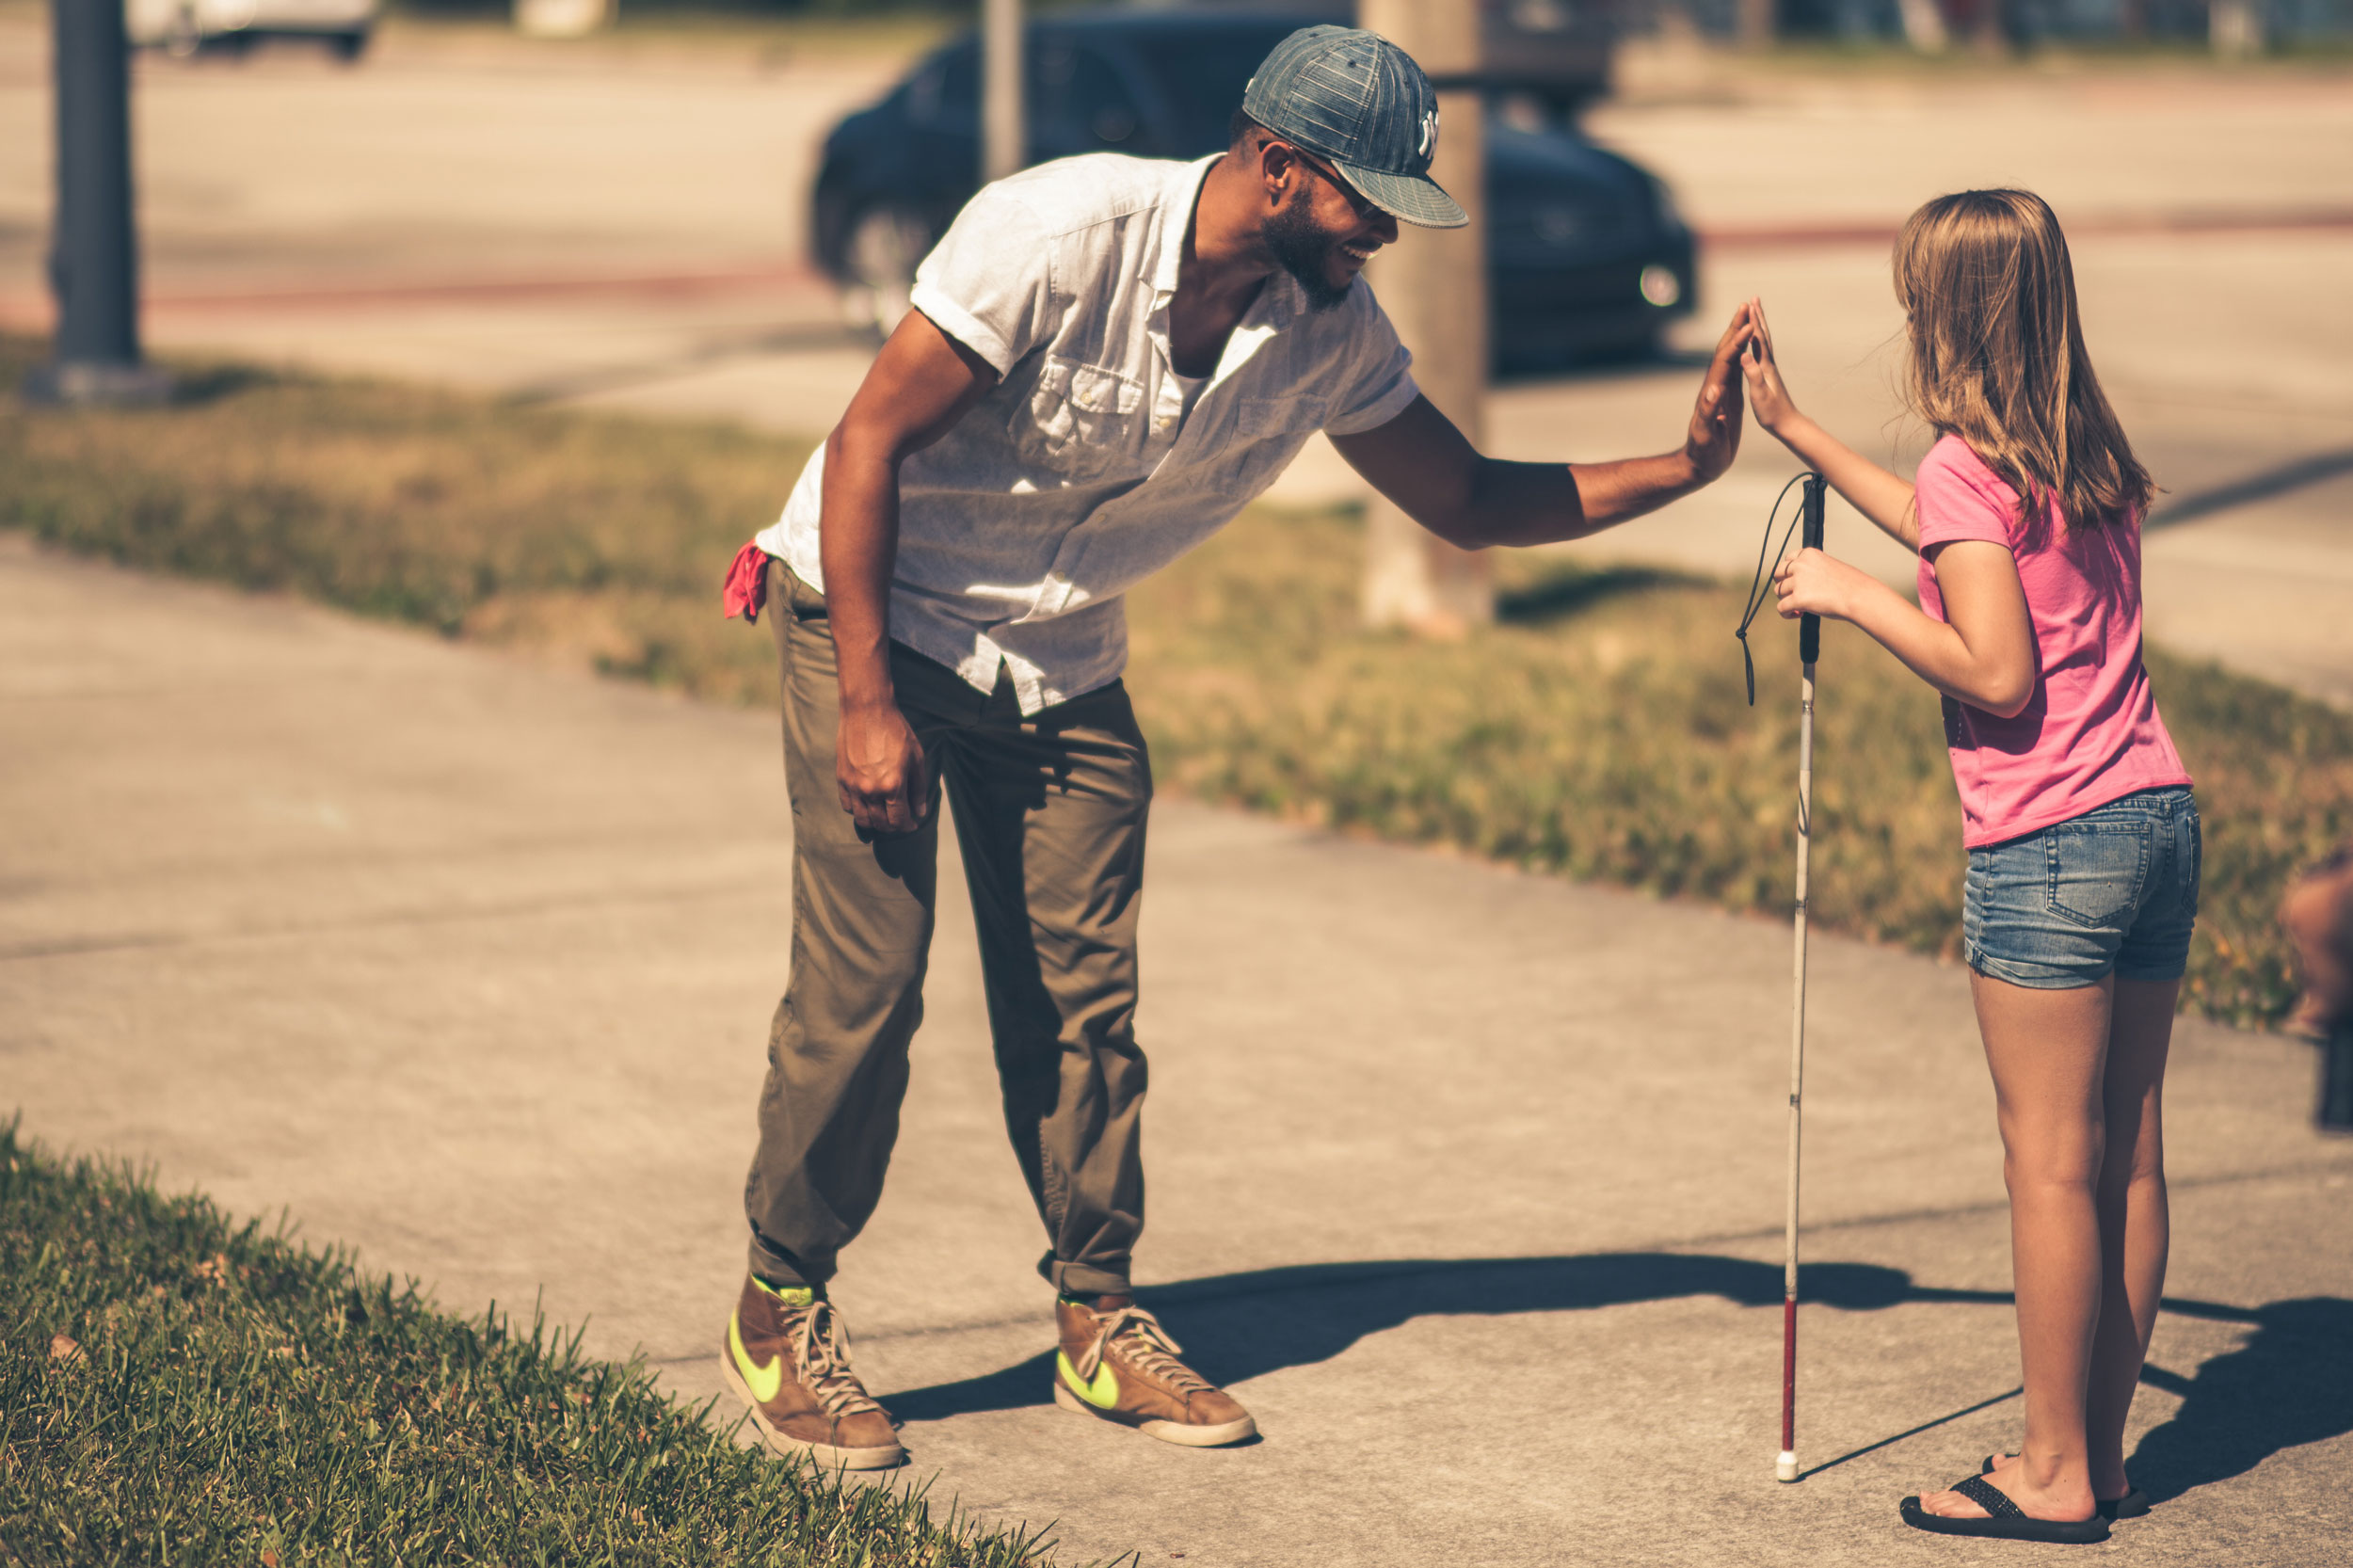 a child who is blind with a white cane in one hand and giving a high five with her other hadn to a person she is passing as she walks on a sidewalk